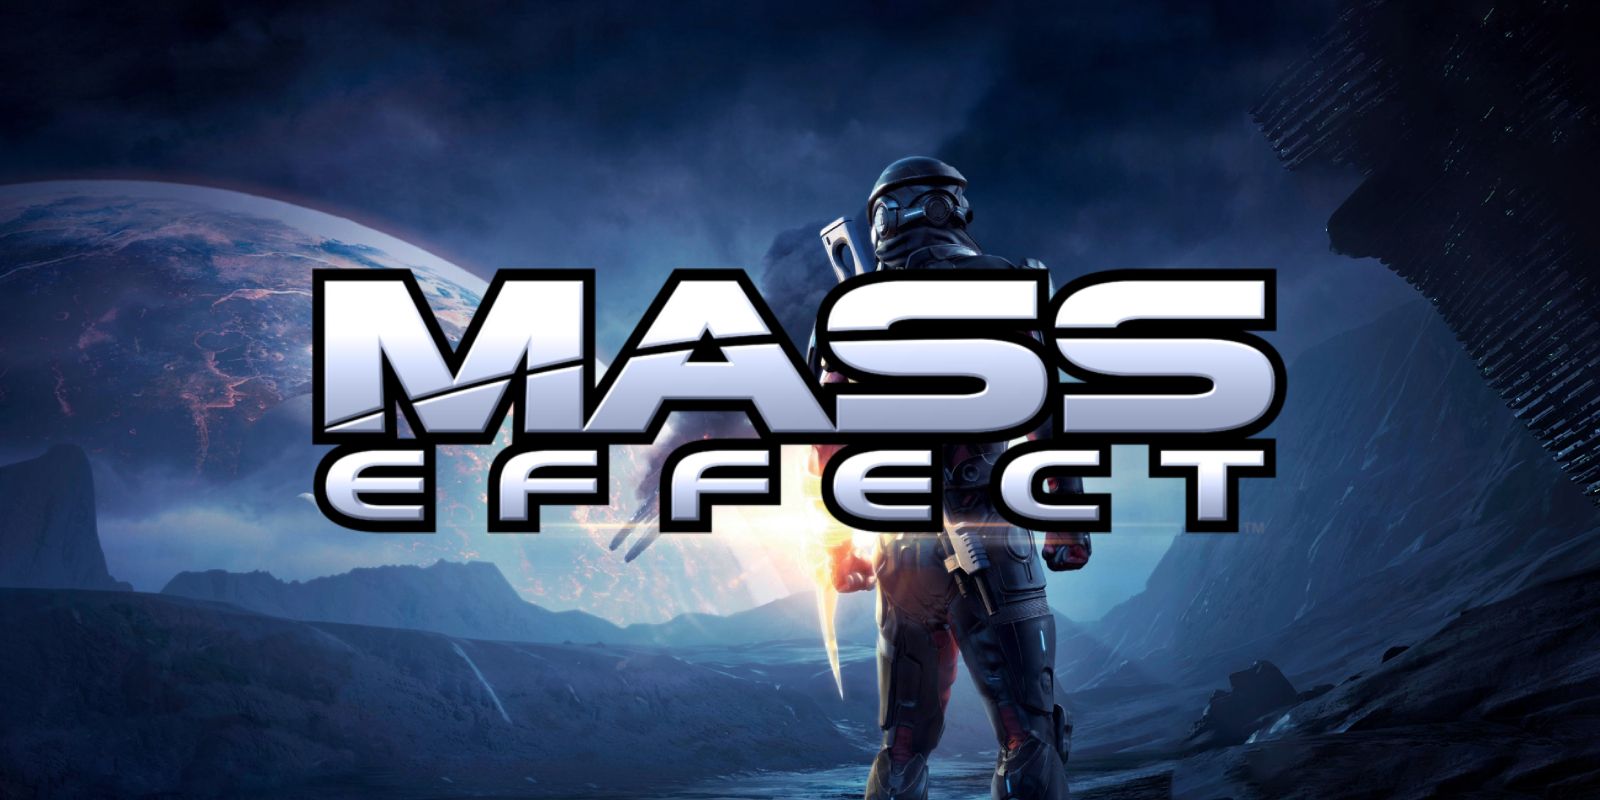 Sherpherd stands in full view of a planet in the horizon behind the Mass Effect logo.